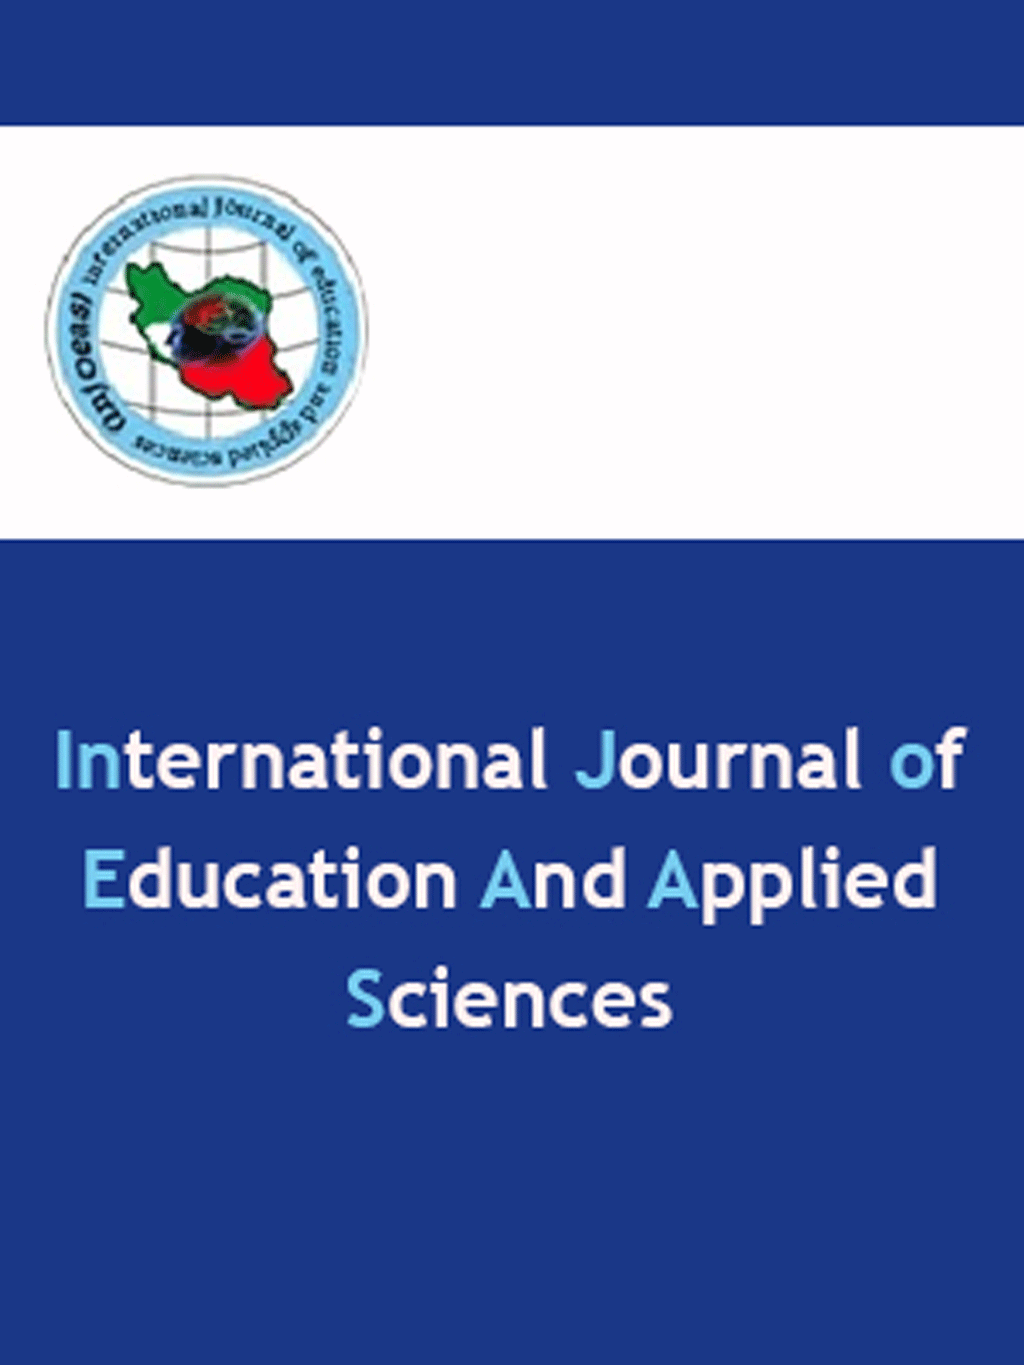 Education and Applied Sciences - October 2021, Volume 2 - Number 3